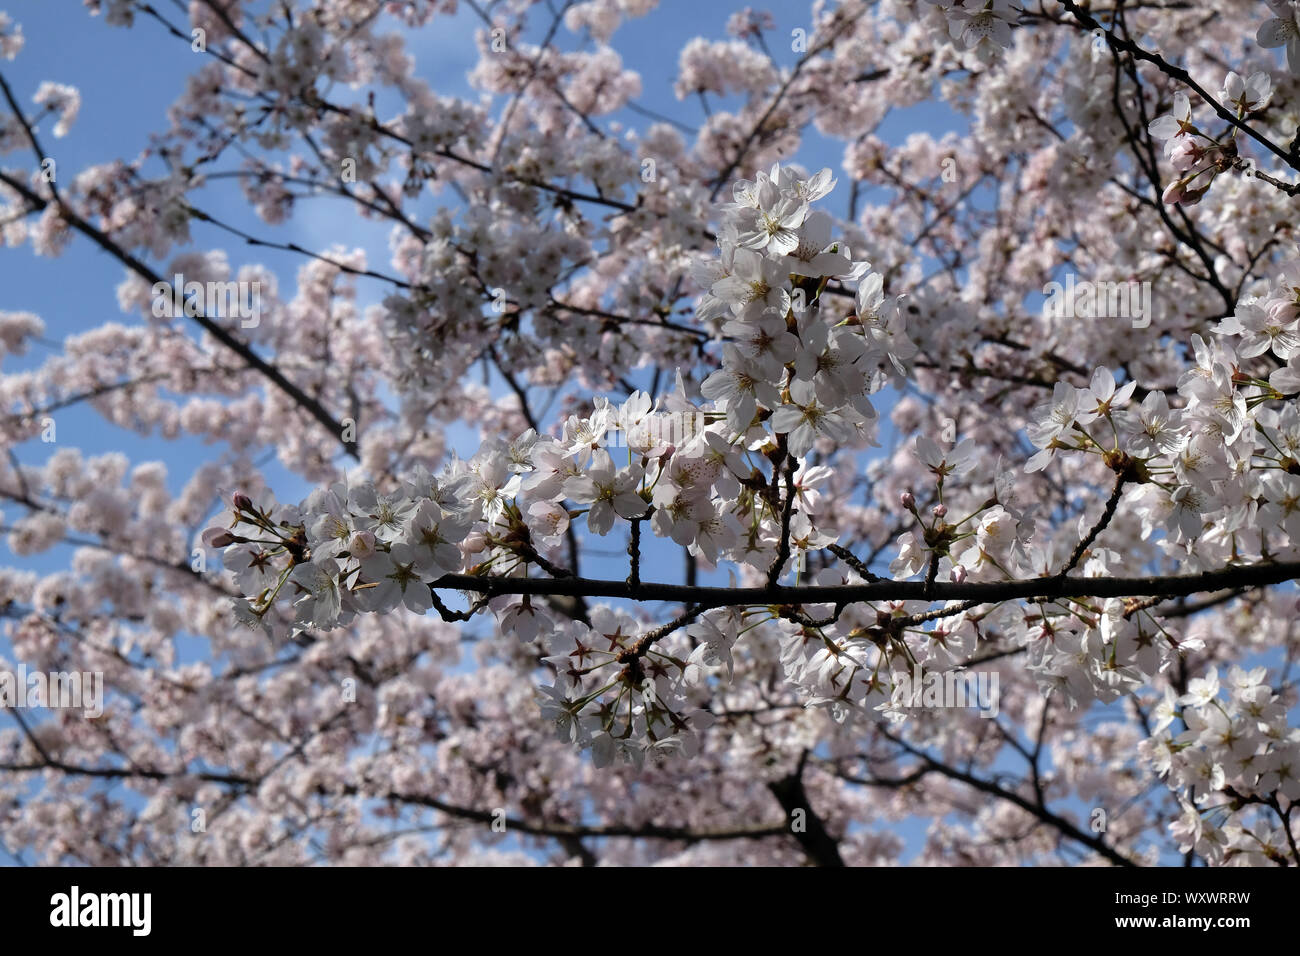 Close up of fruit flowers in the earliest springtime Stock Photo